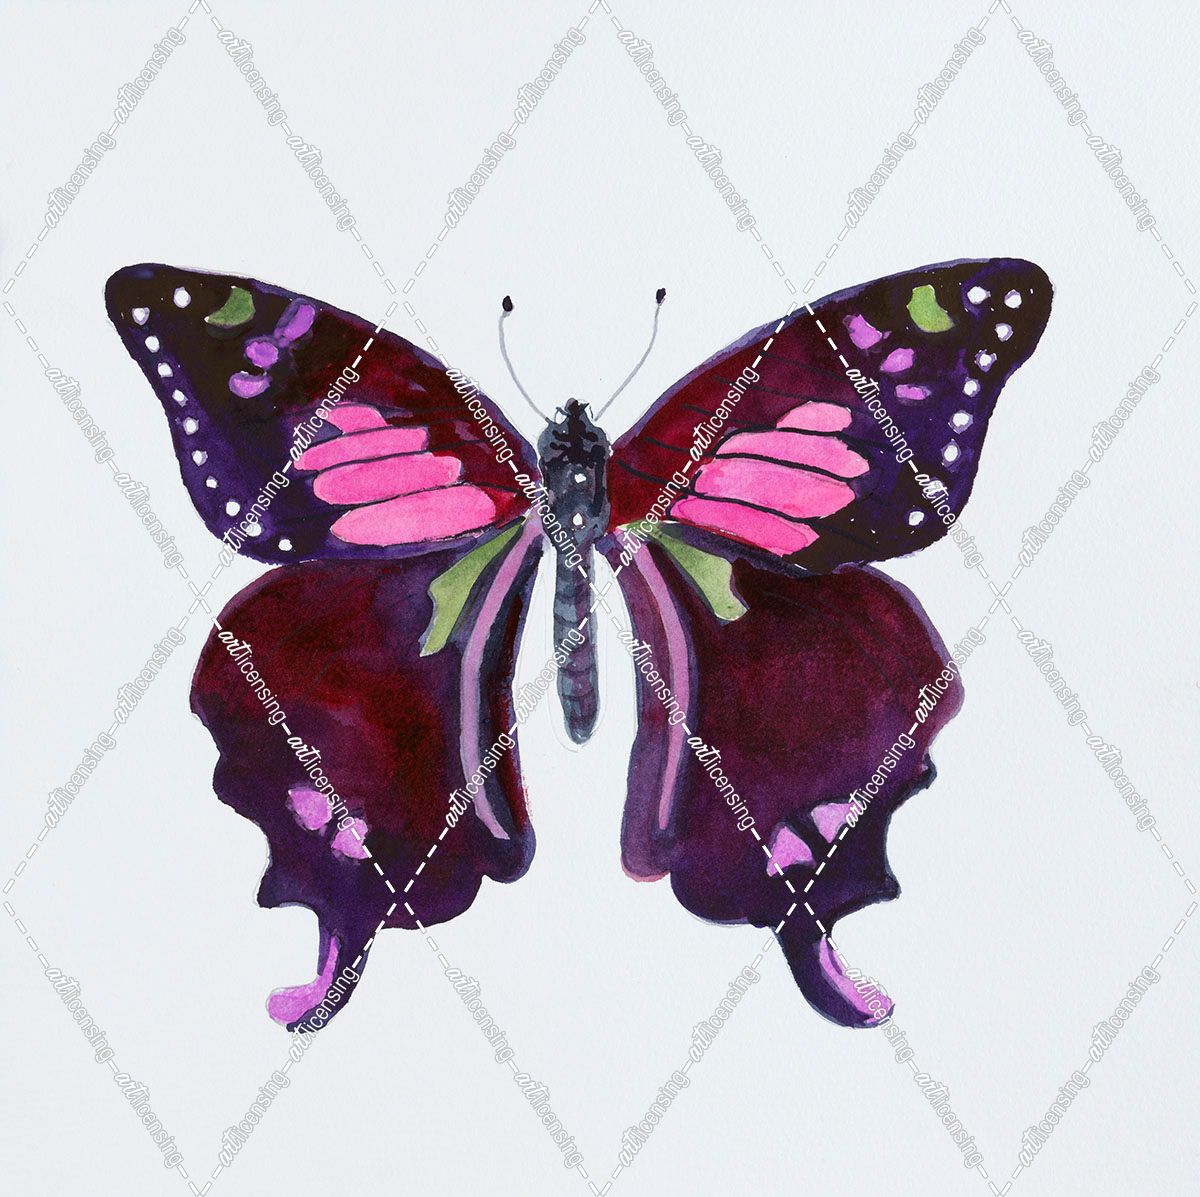 H-Butterfly Collection Graphium weiskei